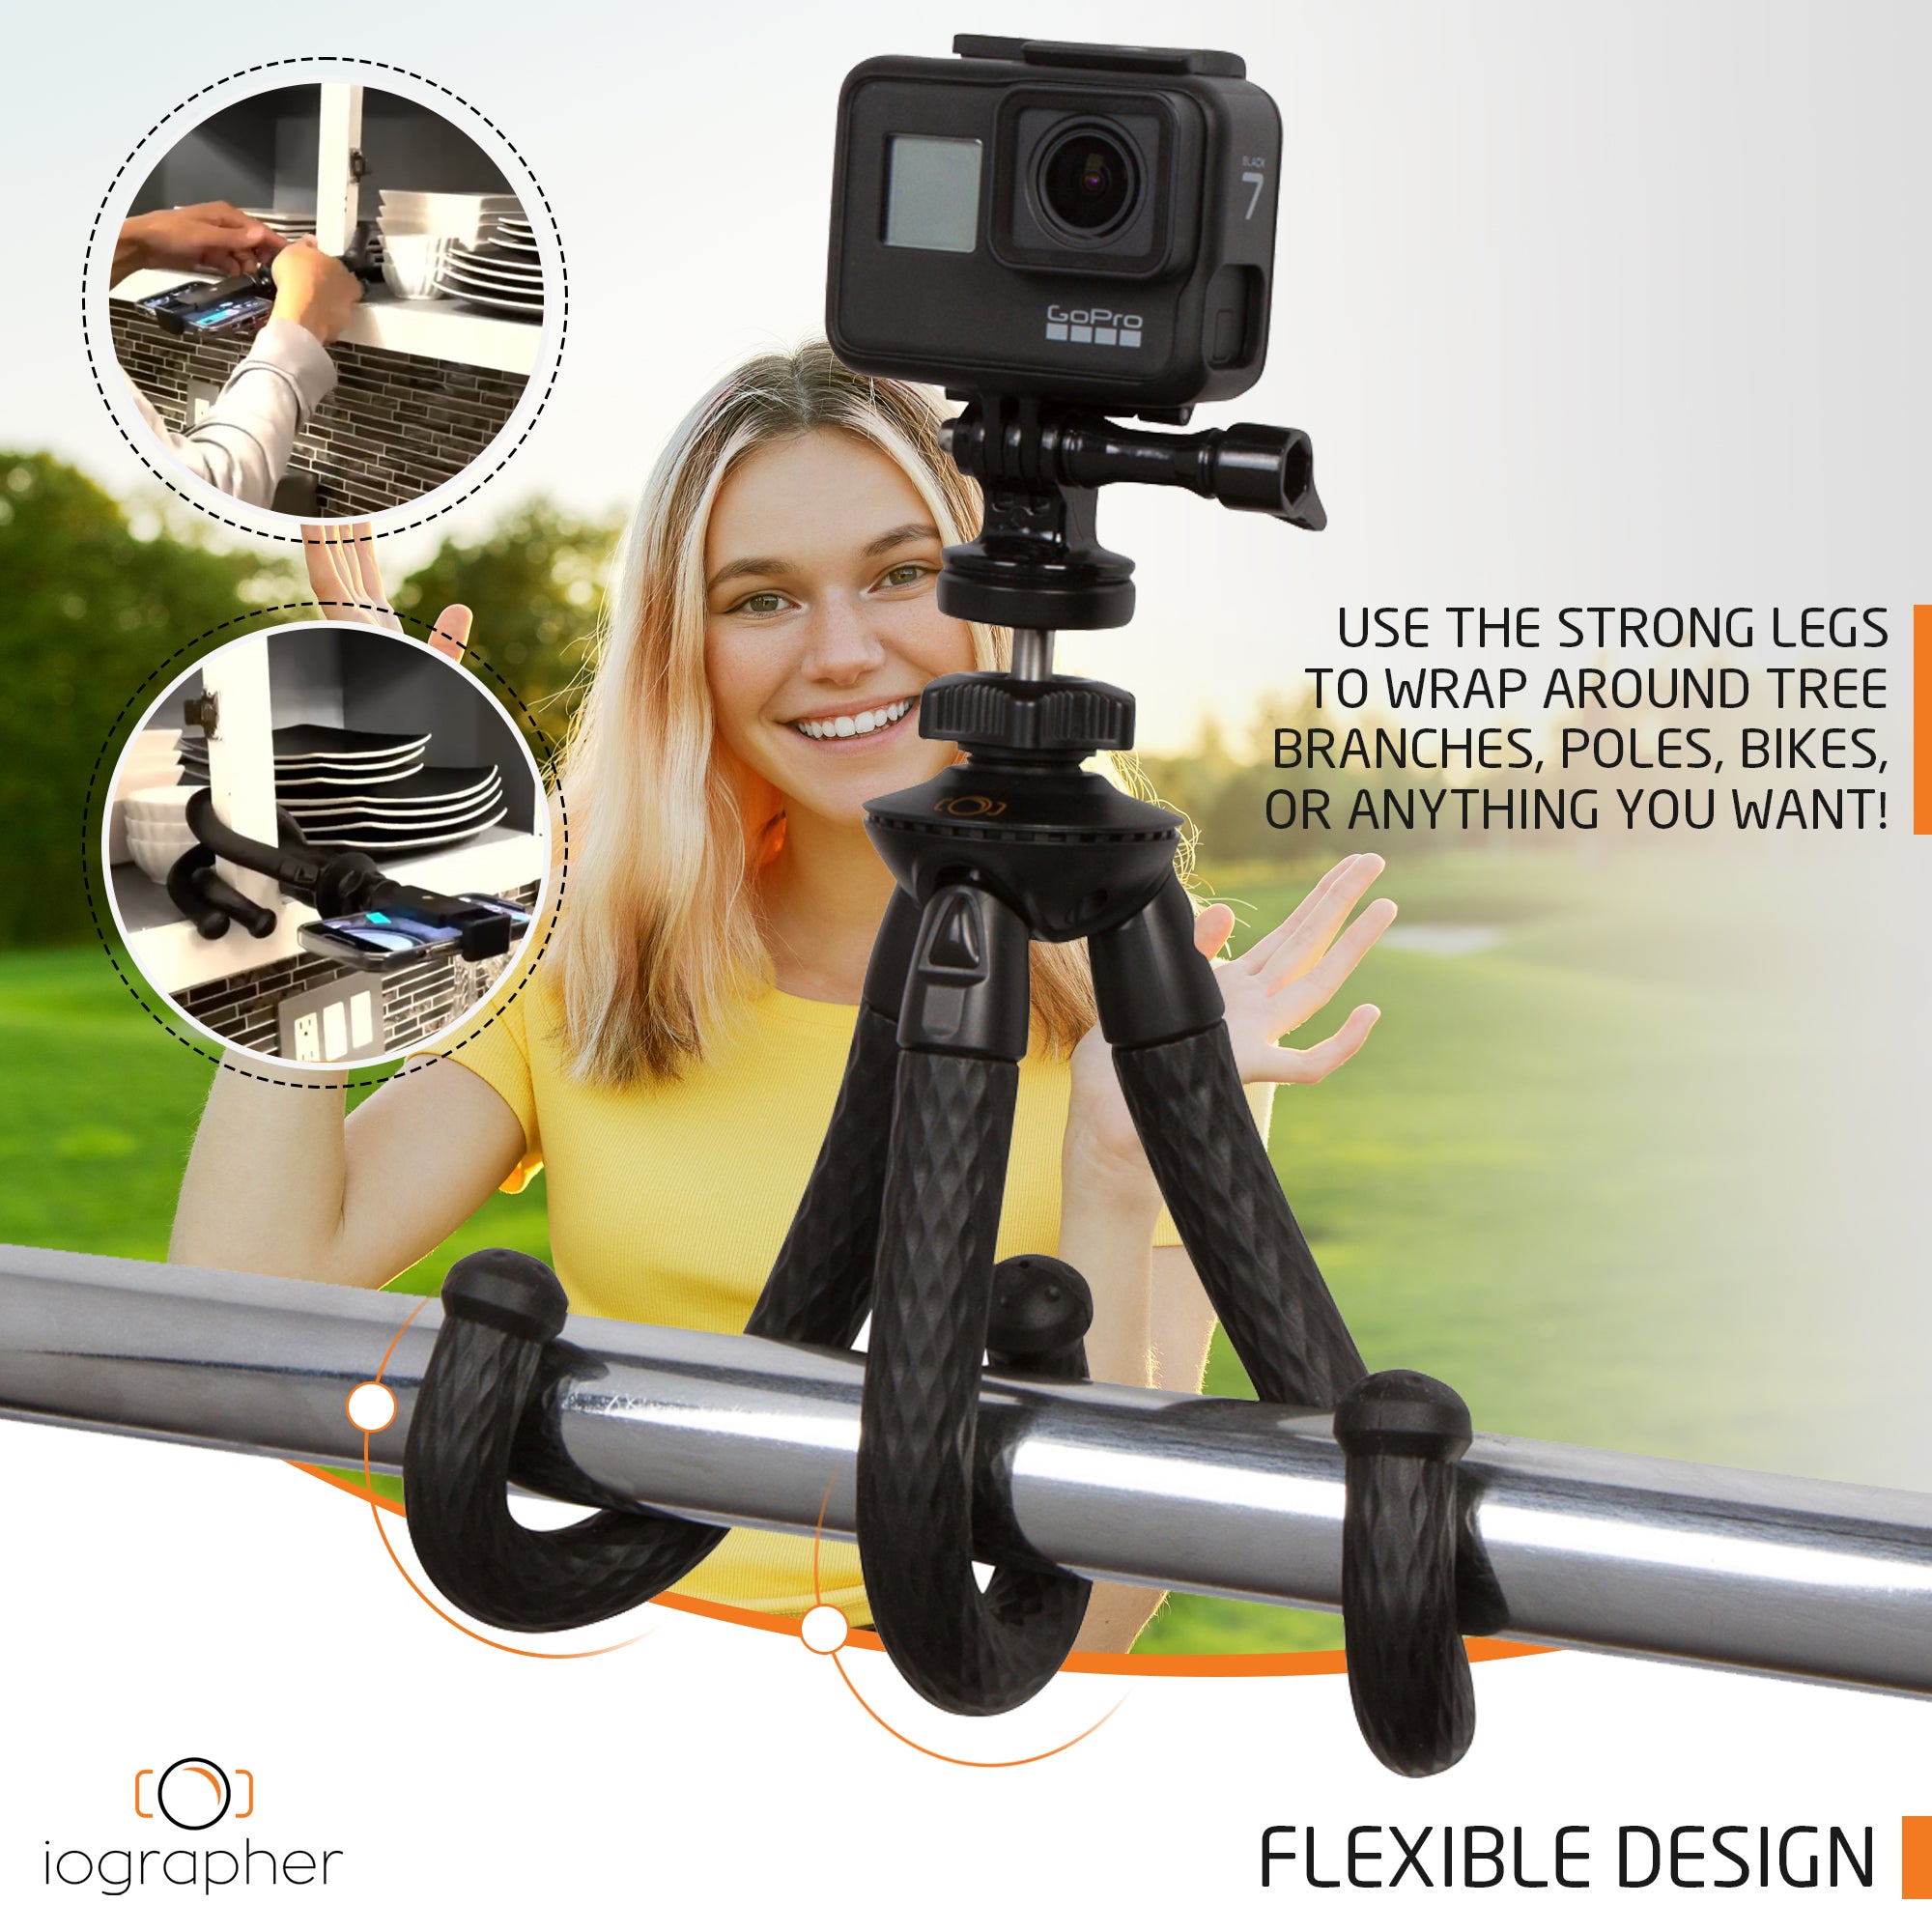 iOgrapher Compact Flexible Mini Tripod, with Action Camera Mount, Phone Mount, 1/4 20 Mount, Compatible with iOgrapher Cases, M